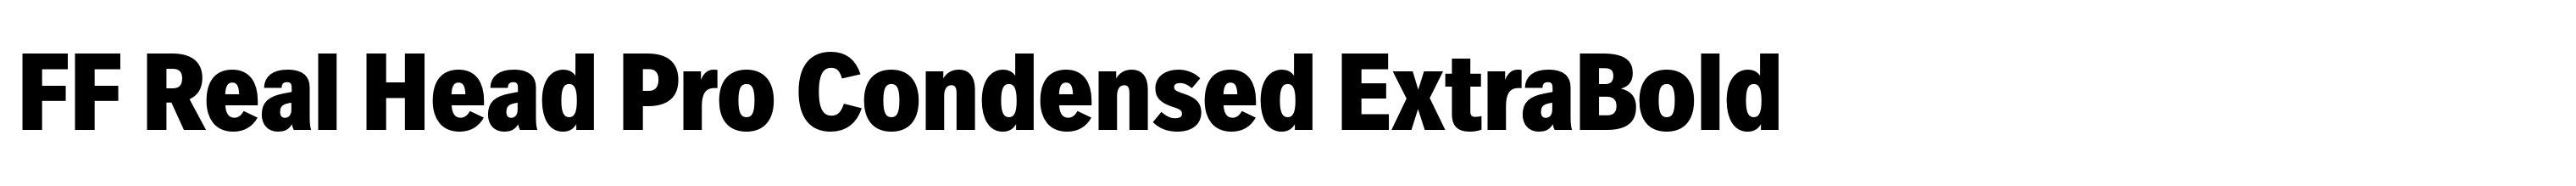 FF Real Head Pro Condensed ExtraBold